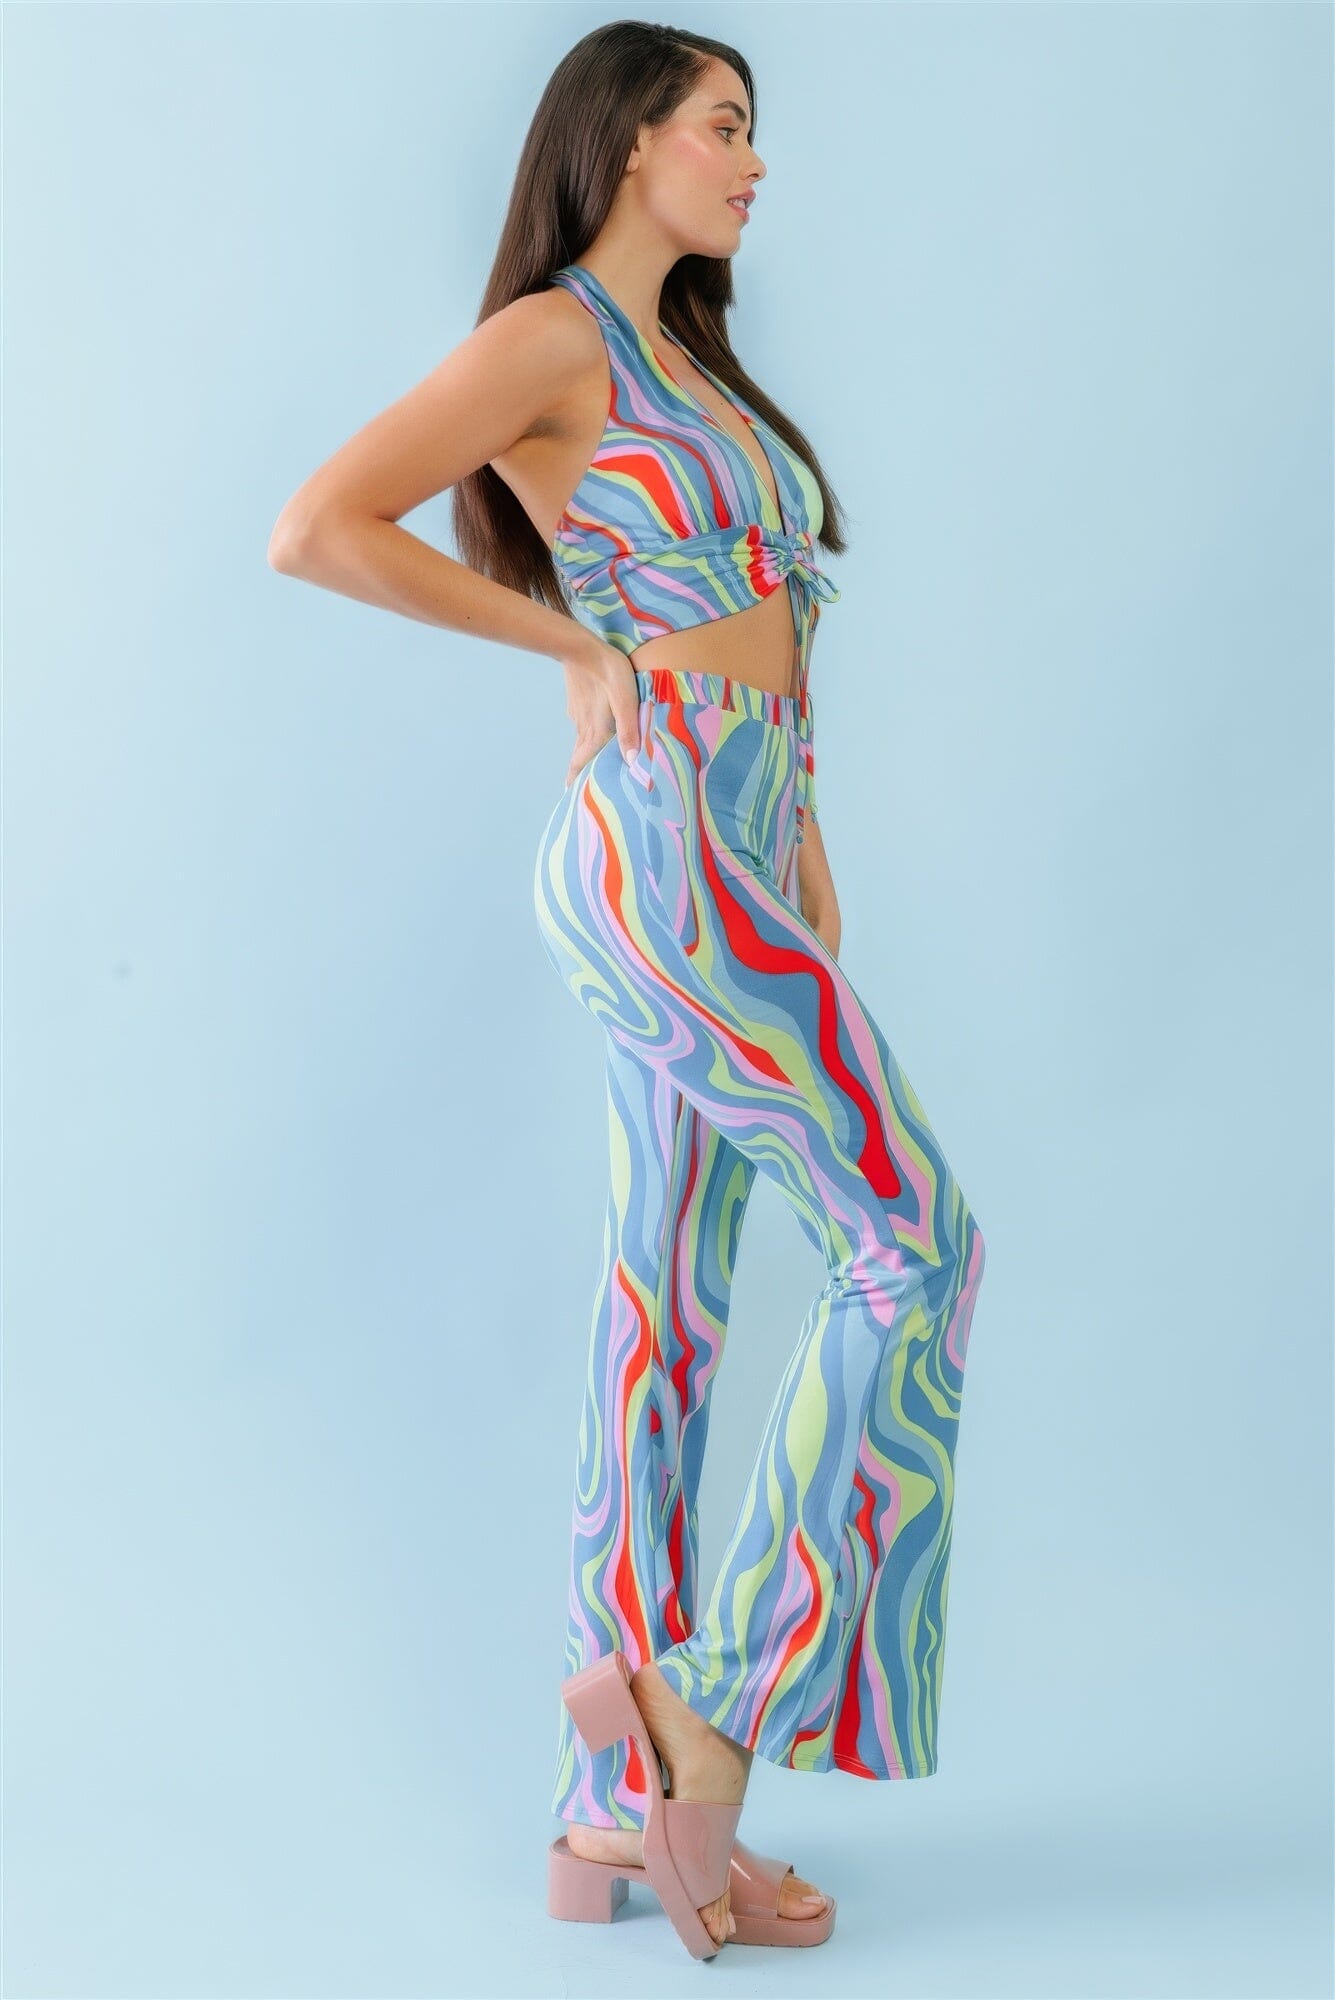 Multicolor Abstract Print Halter V-neck Ruched Open Back Crop Top & High Waist Pants Outfit Set Outfit Sets jehouze 